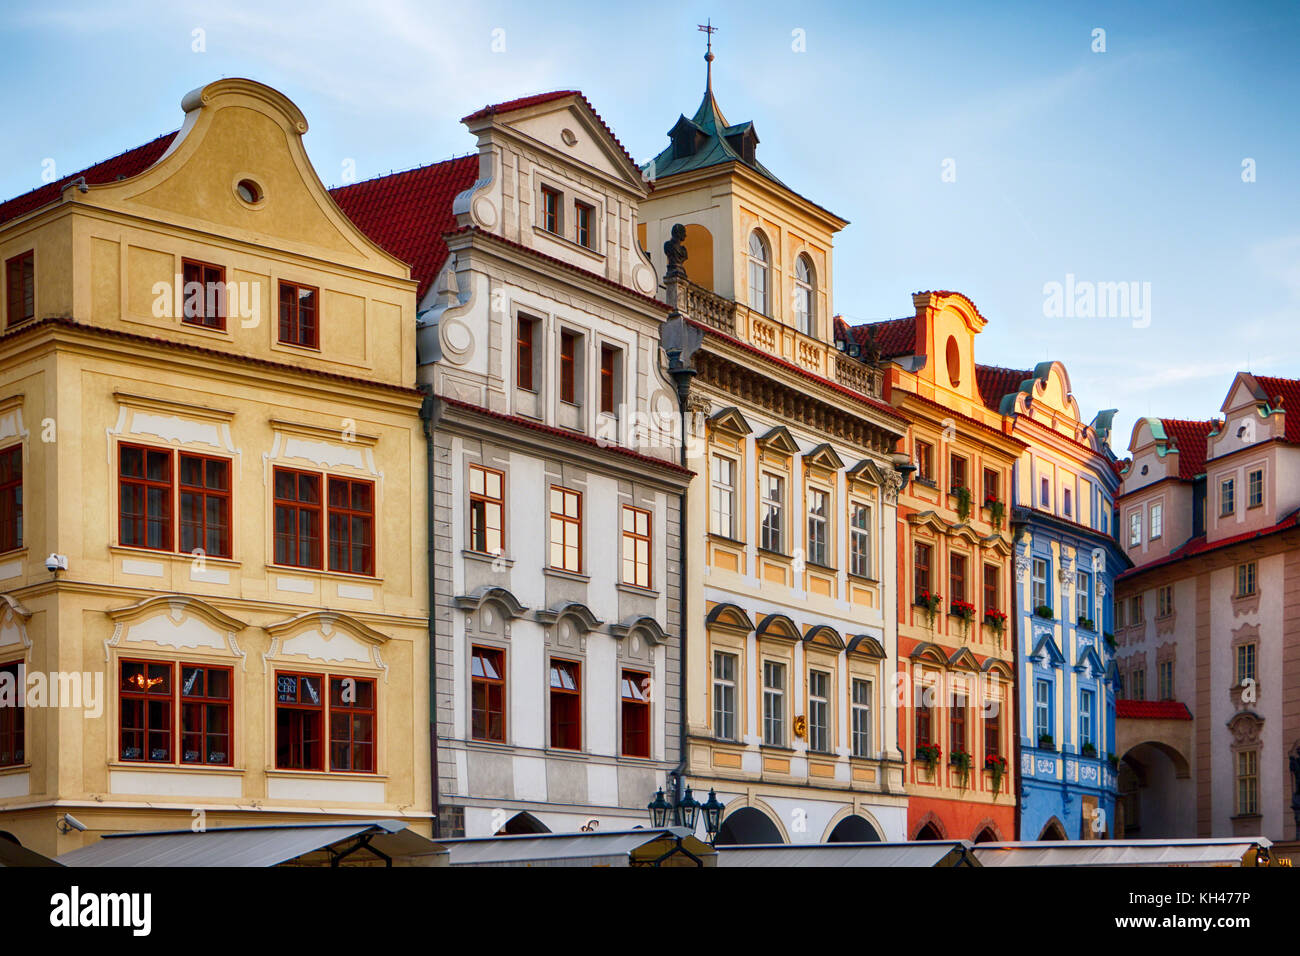 Low Angle View of Colorful Houses on Old Town Square, Prague, Czech Republic Stock Photo